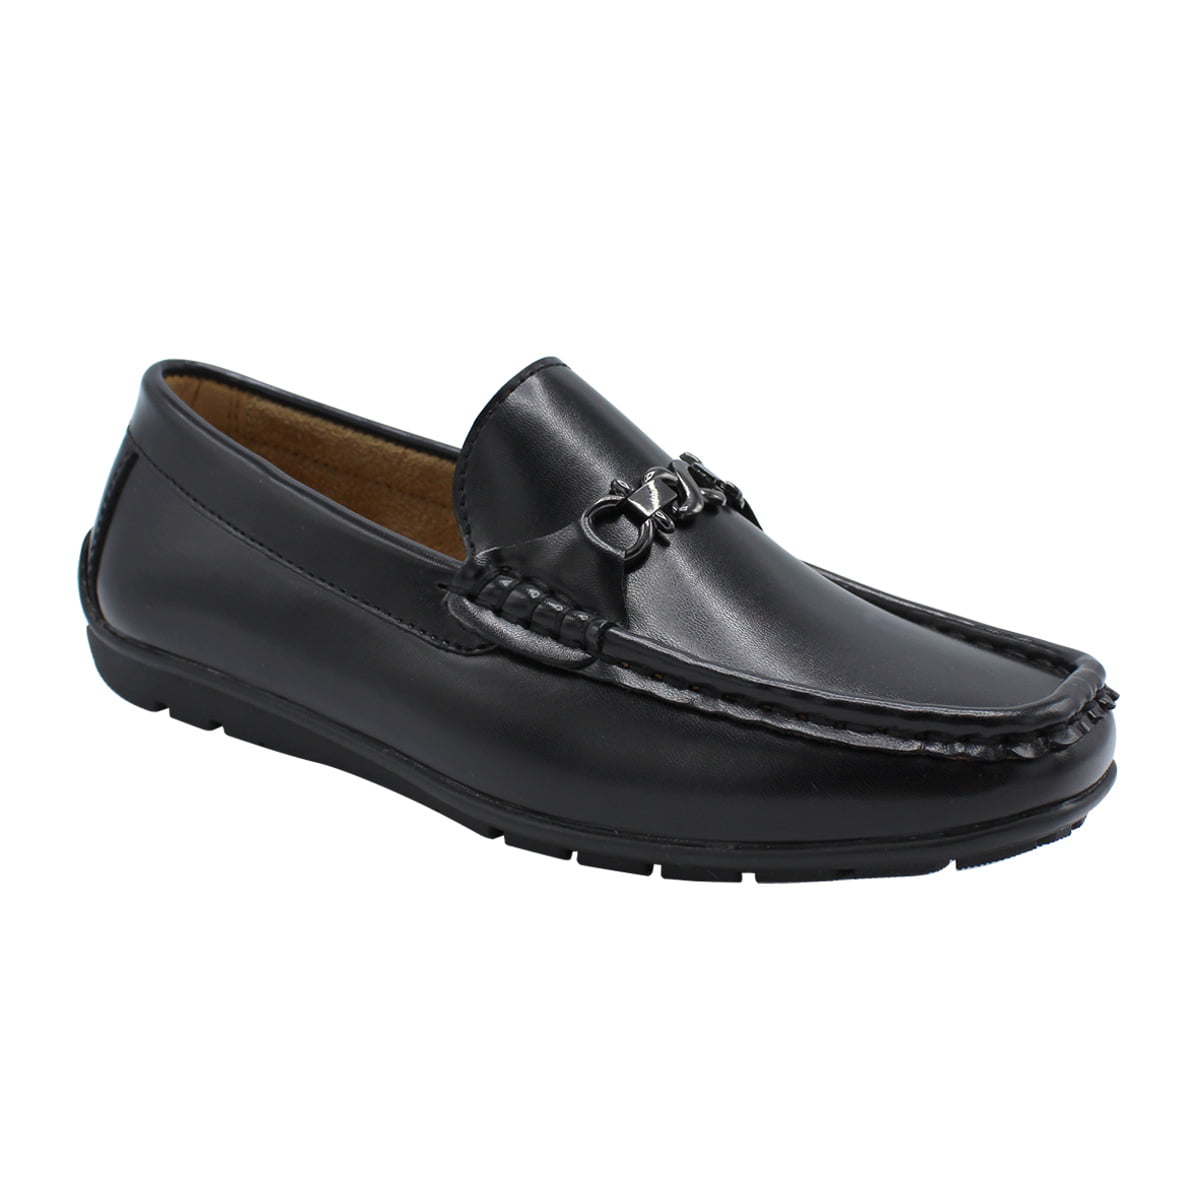 MENS BATA  SLIP ON FAUX LEATHER MOCCASINS FORMAL WORK CASUAL SHOES BLACK SZ 6-11 